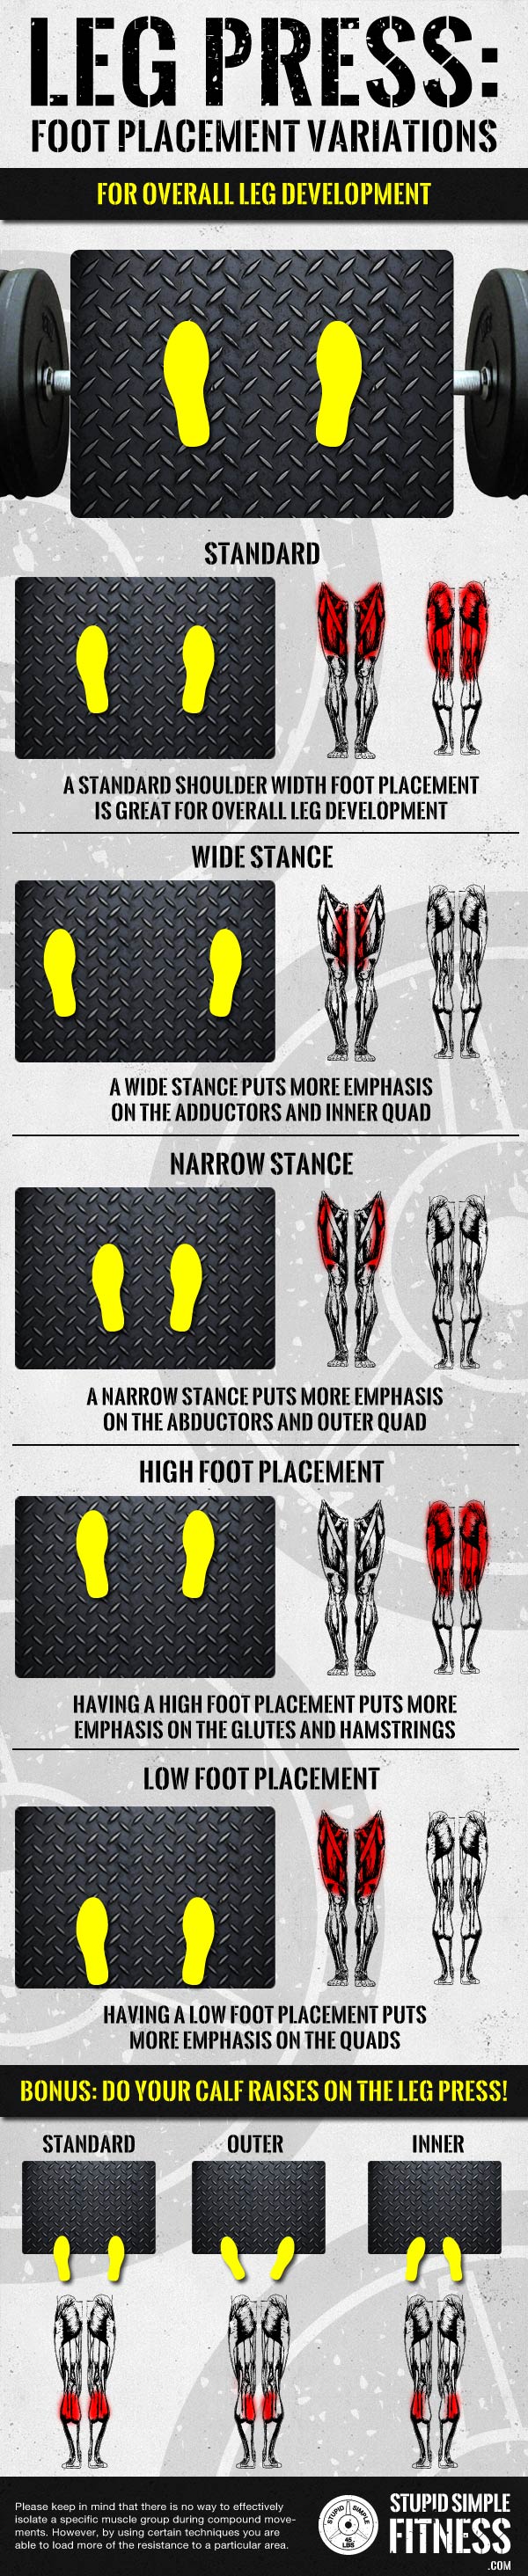 How to Leg Placement